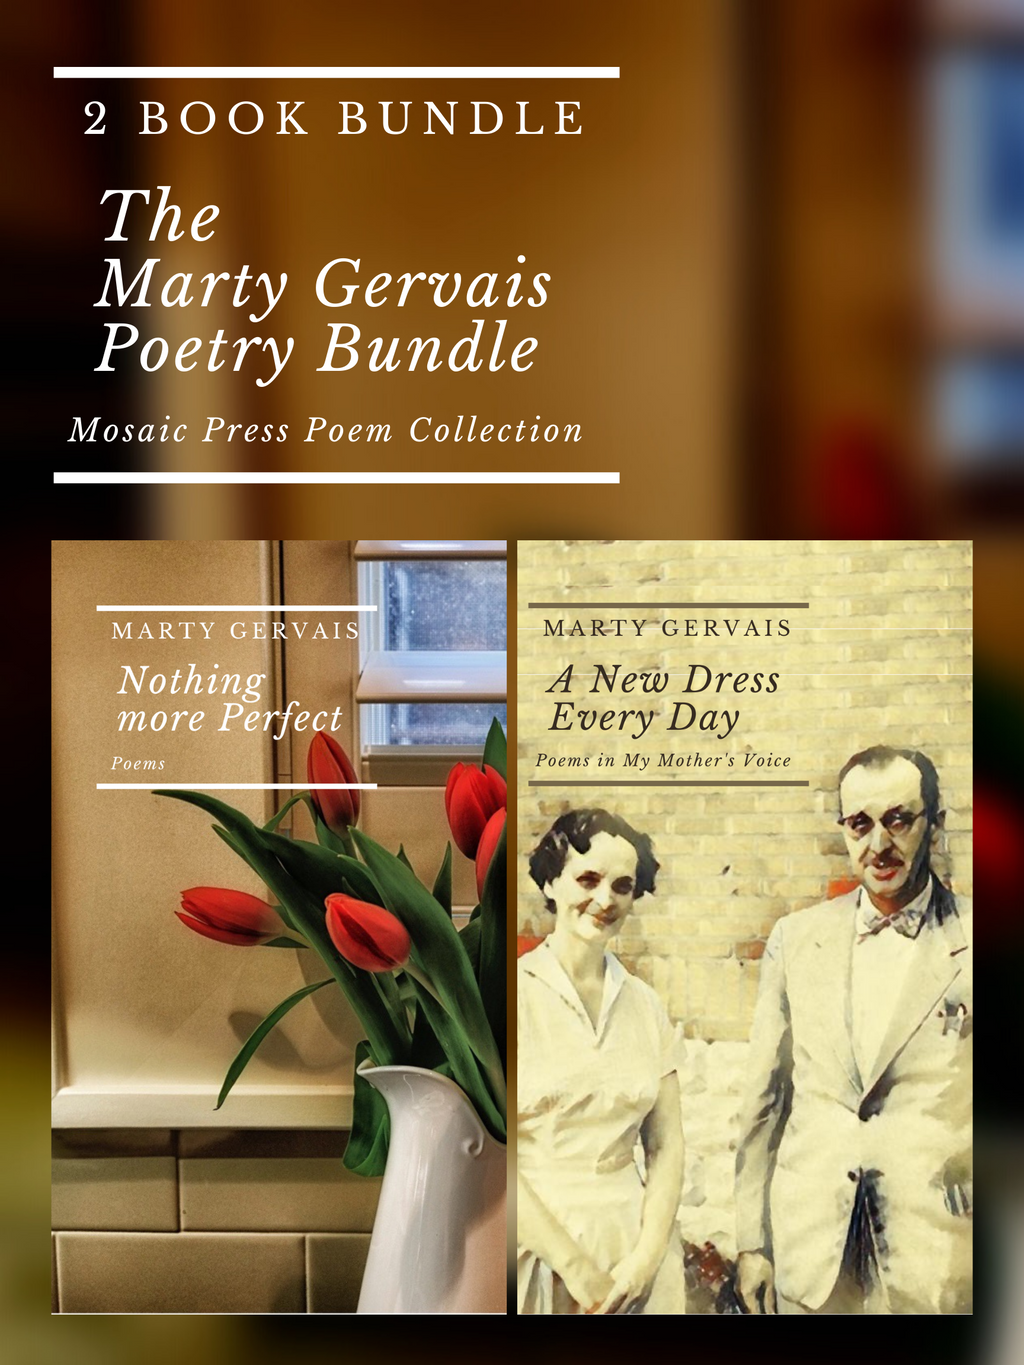 The Marty Gervais Poetry Bundle